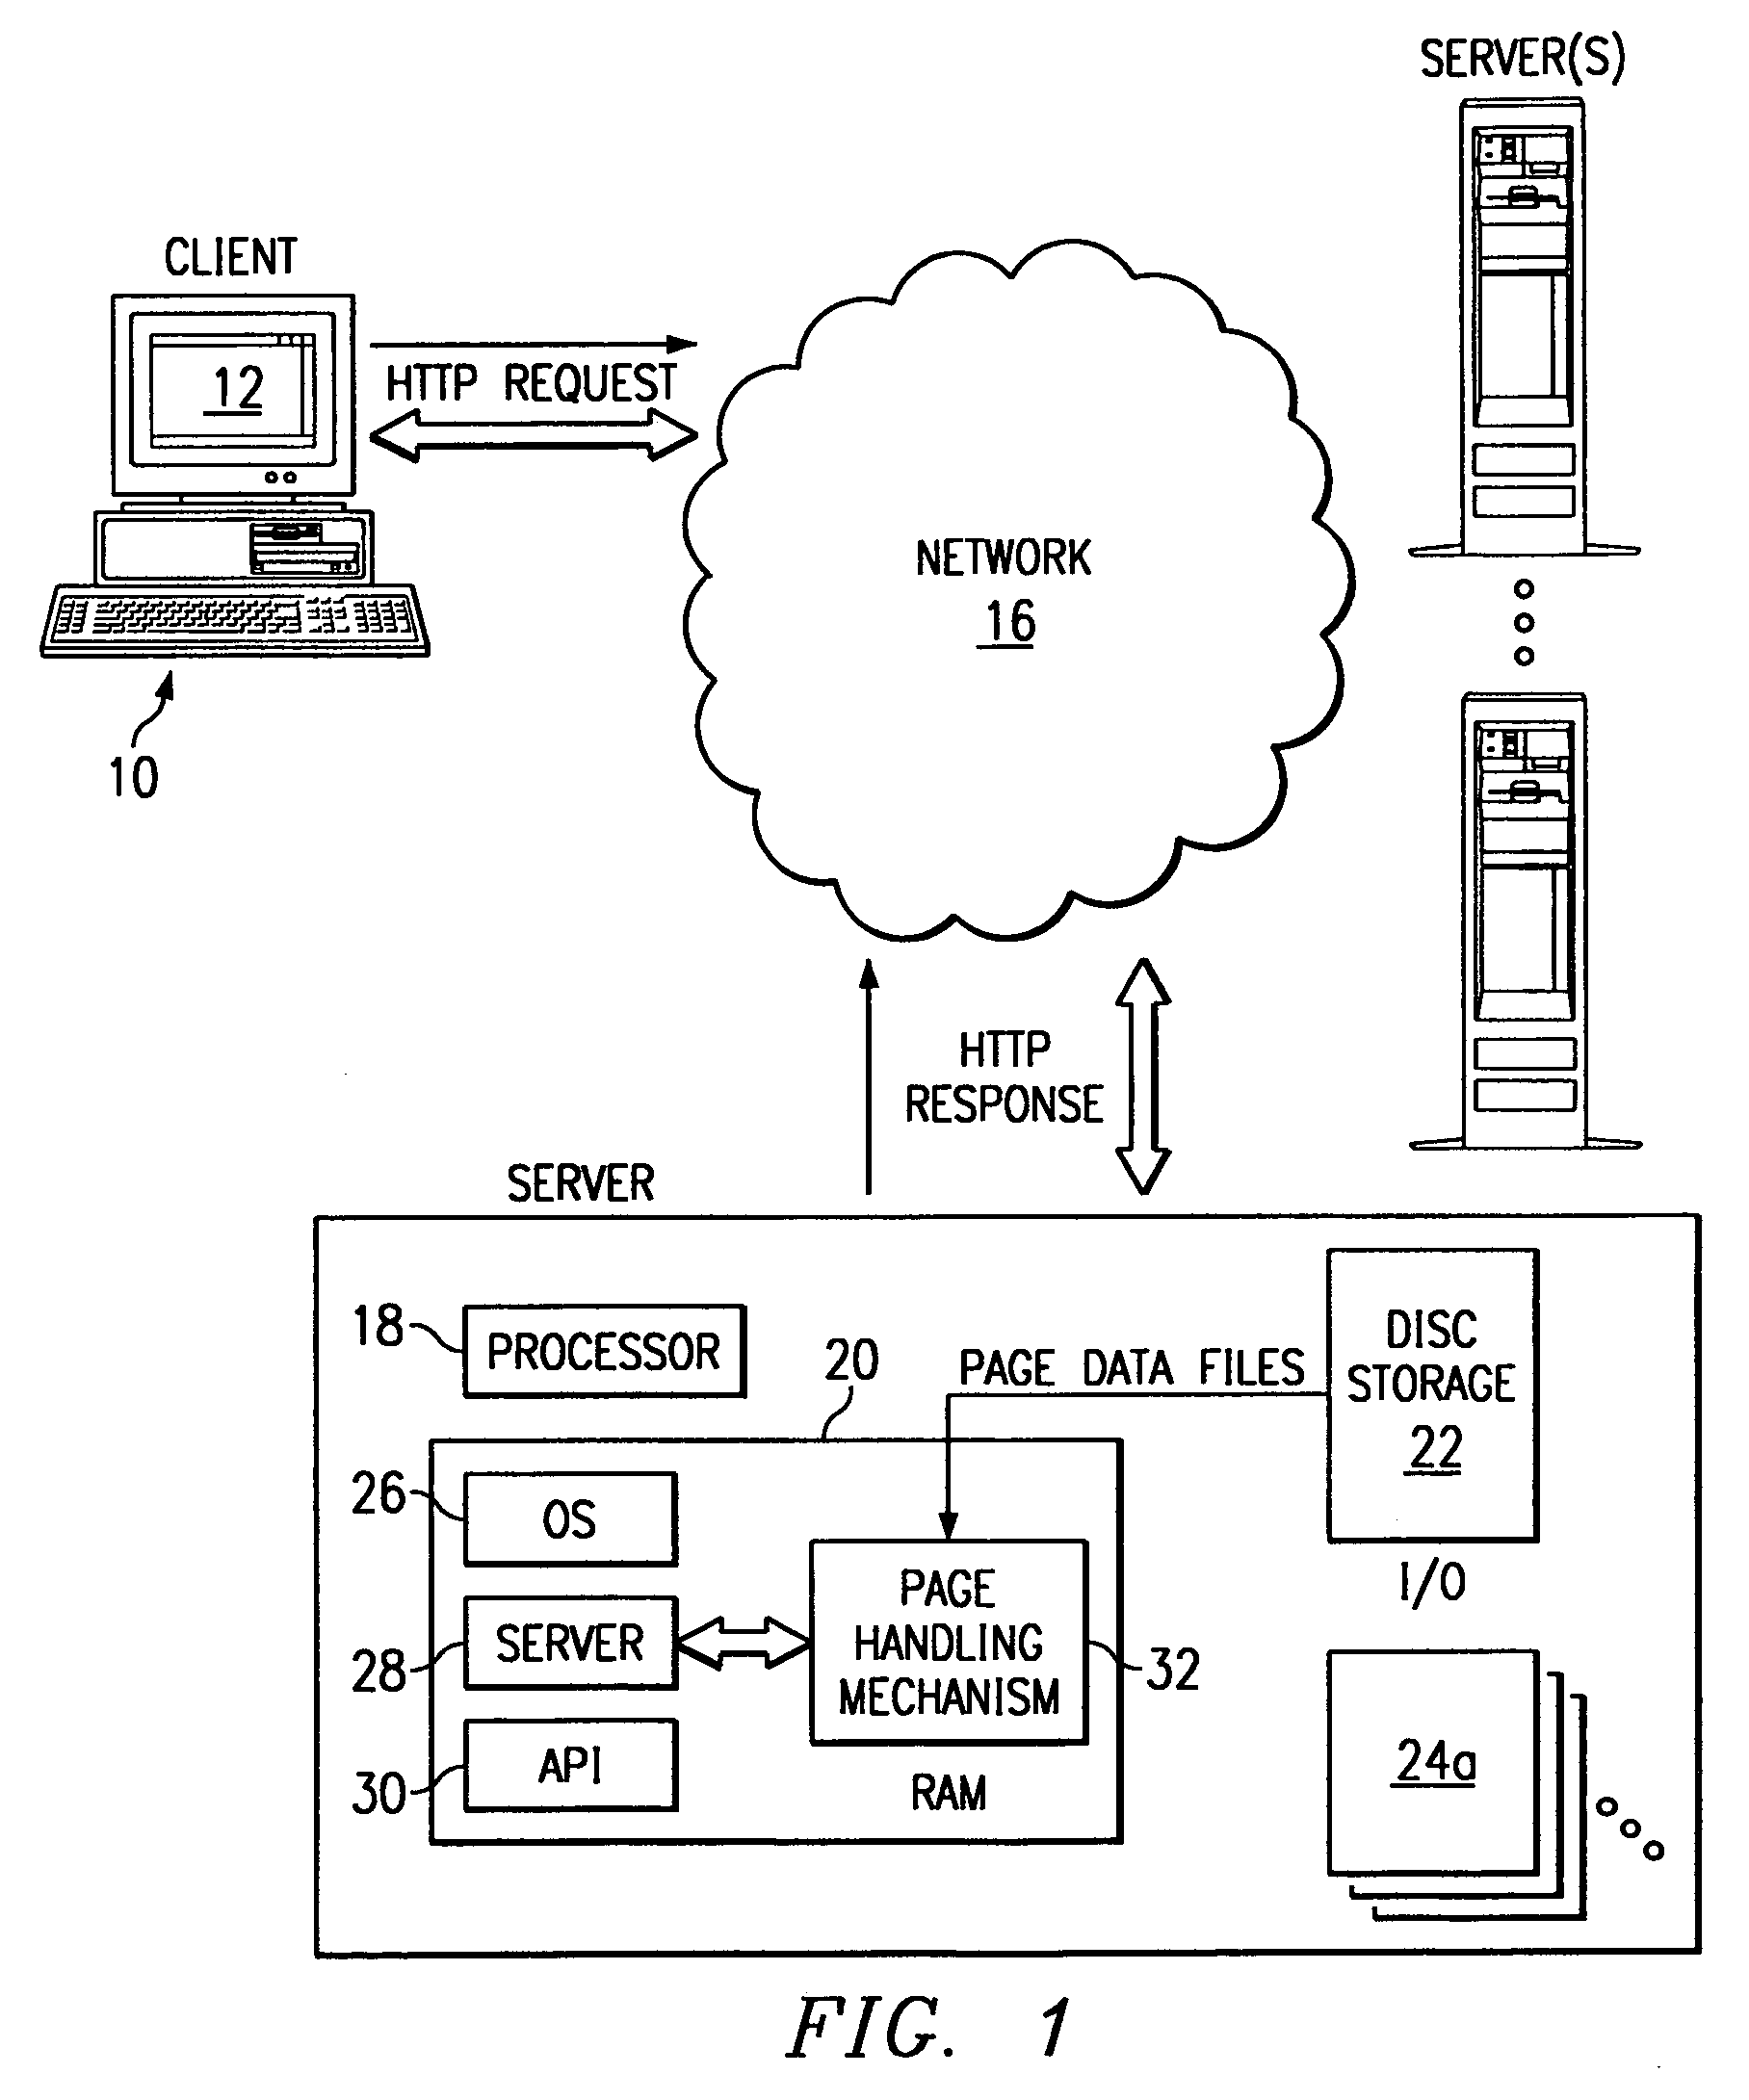 Method for processing a document object model (DOM) tree using a tagbean